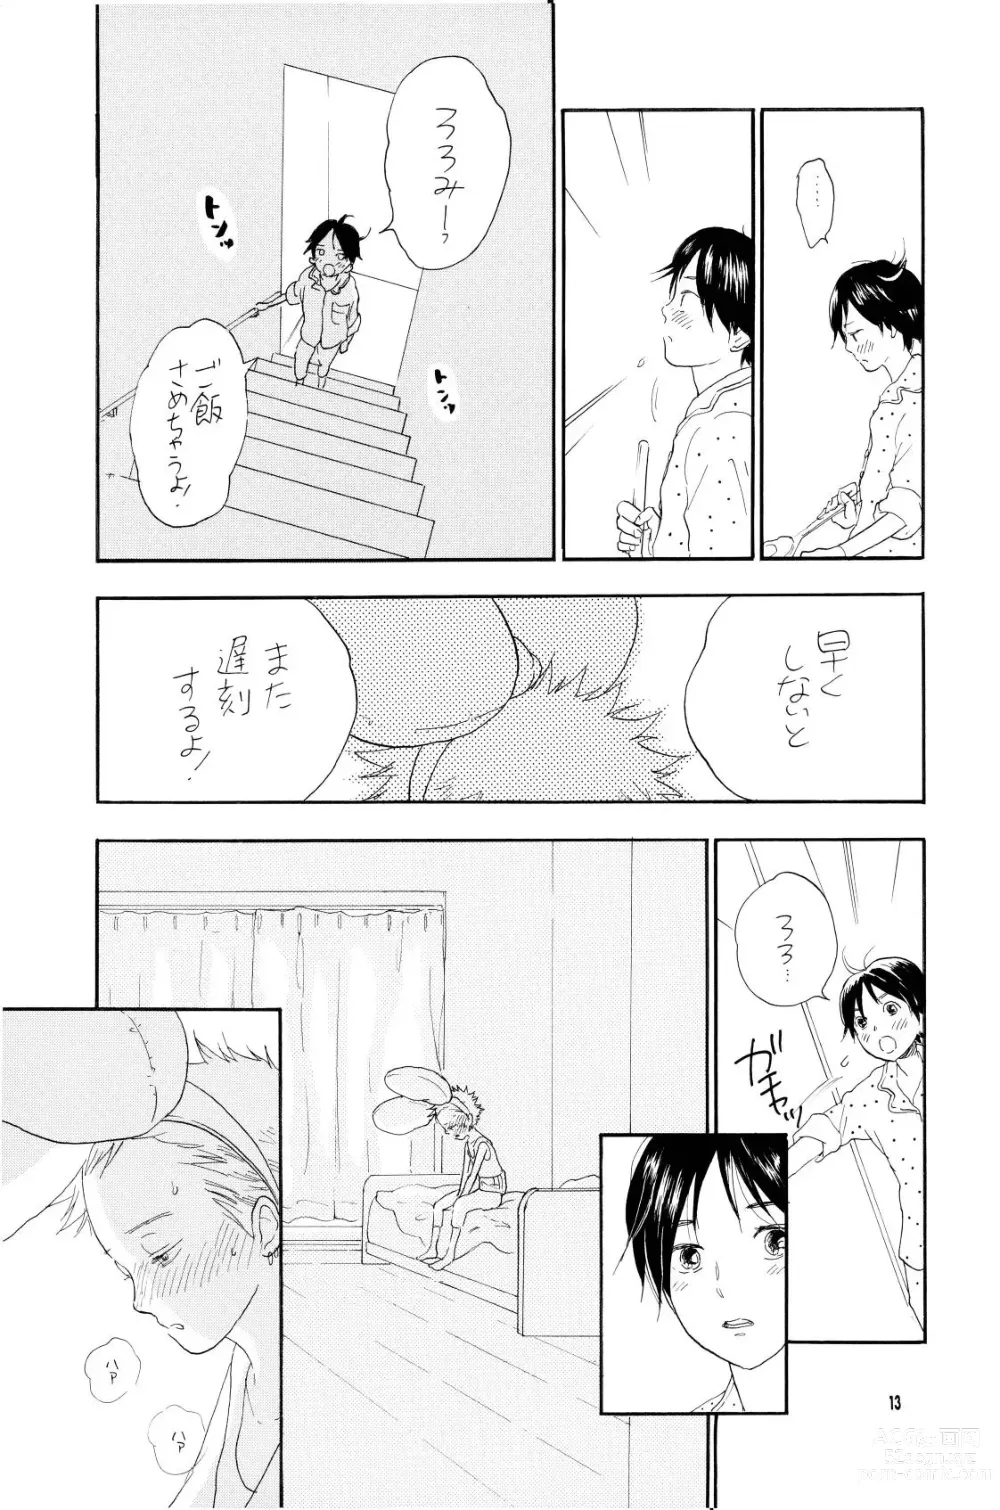 Page 12 of doujinshi your song